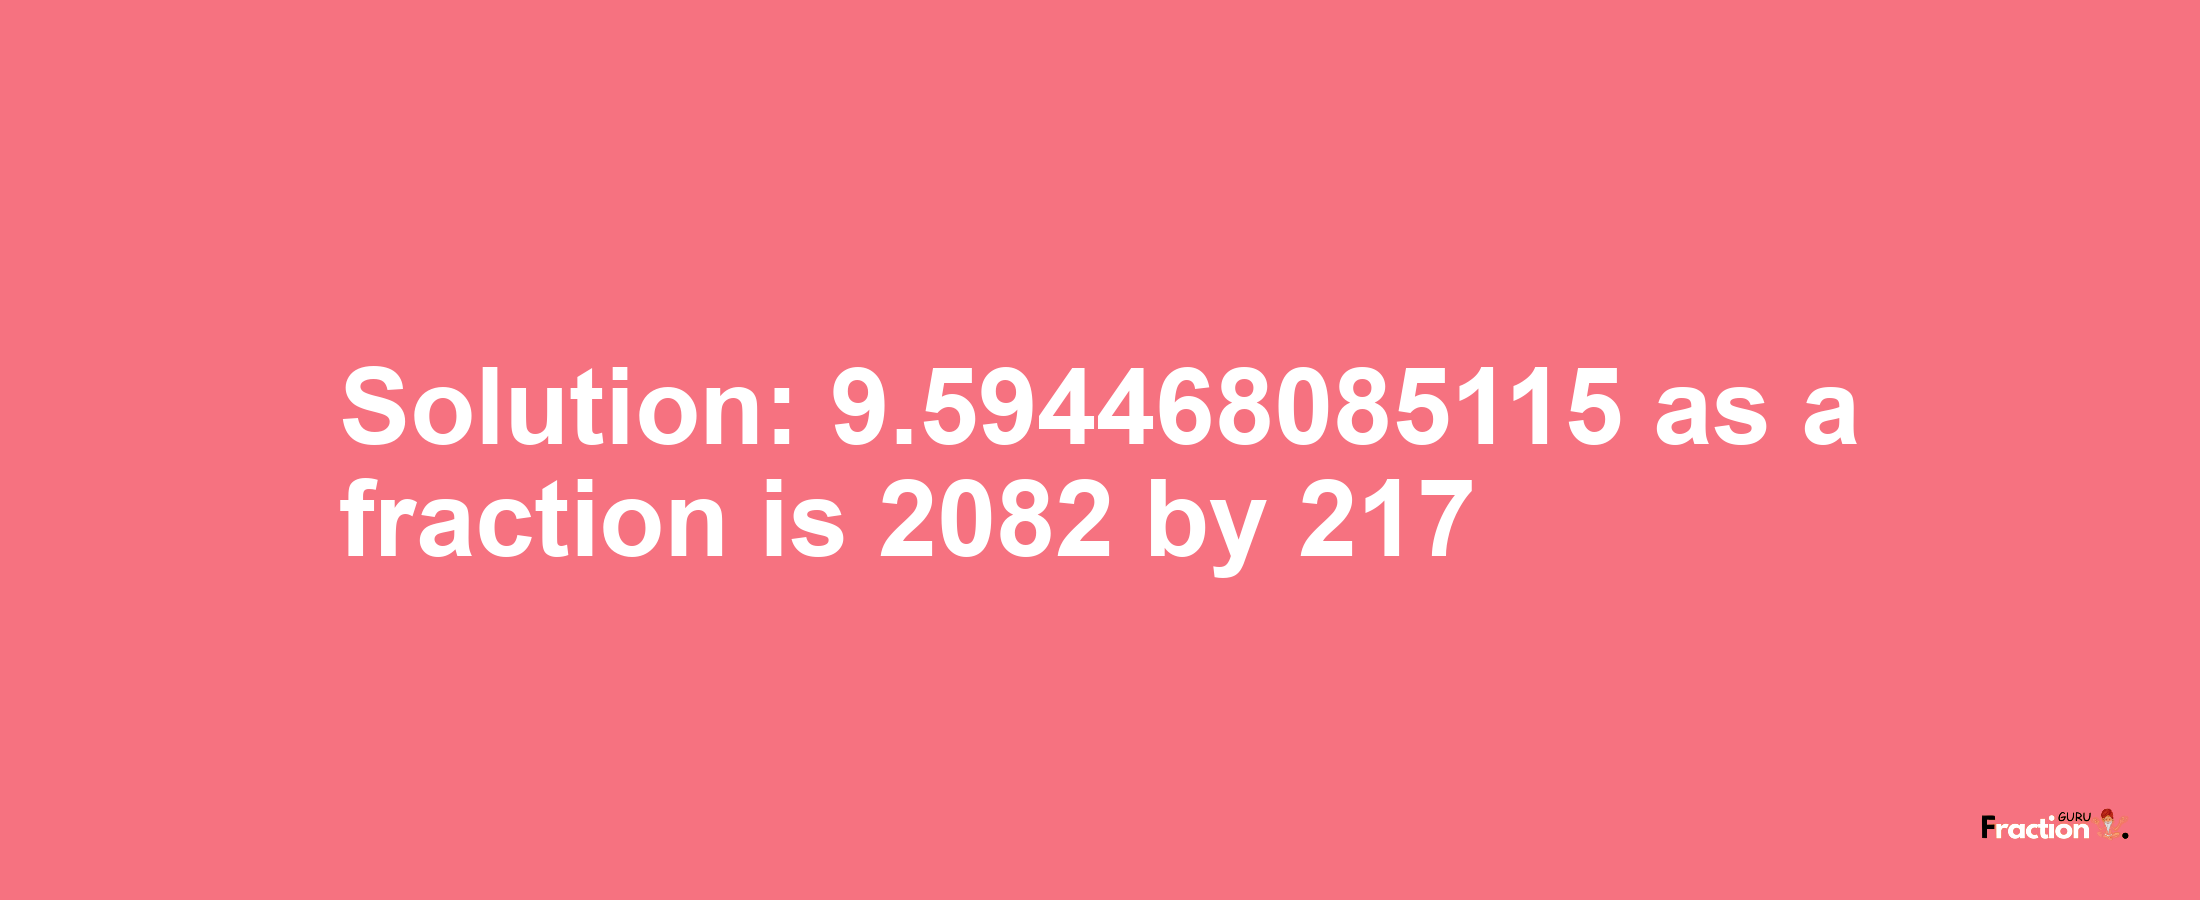 Solution:9.594468085115 as a fraction is 2082/217